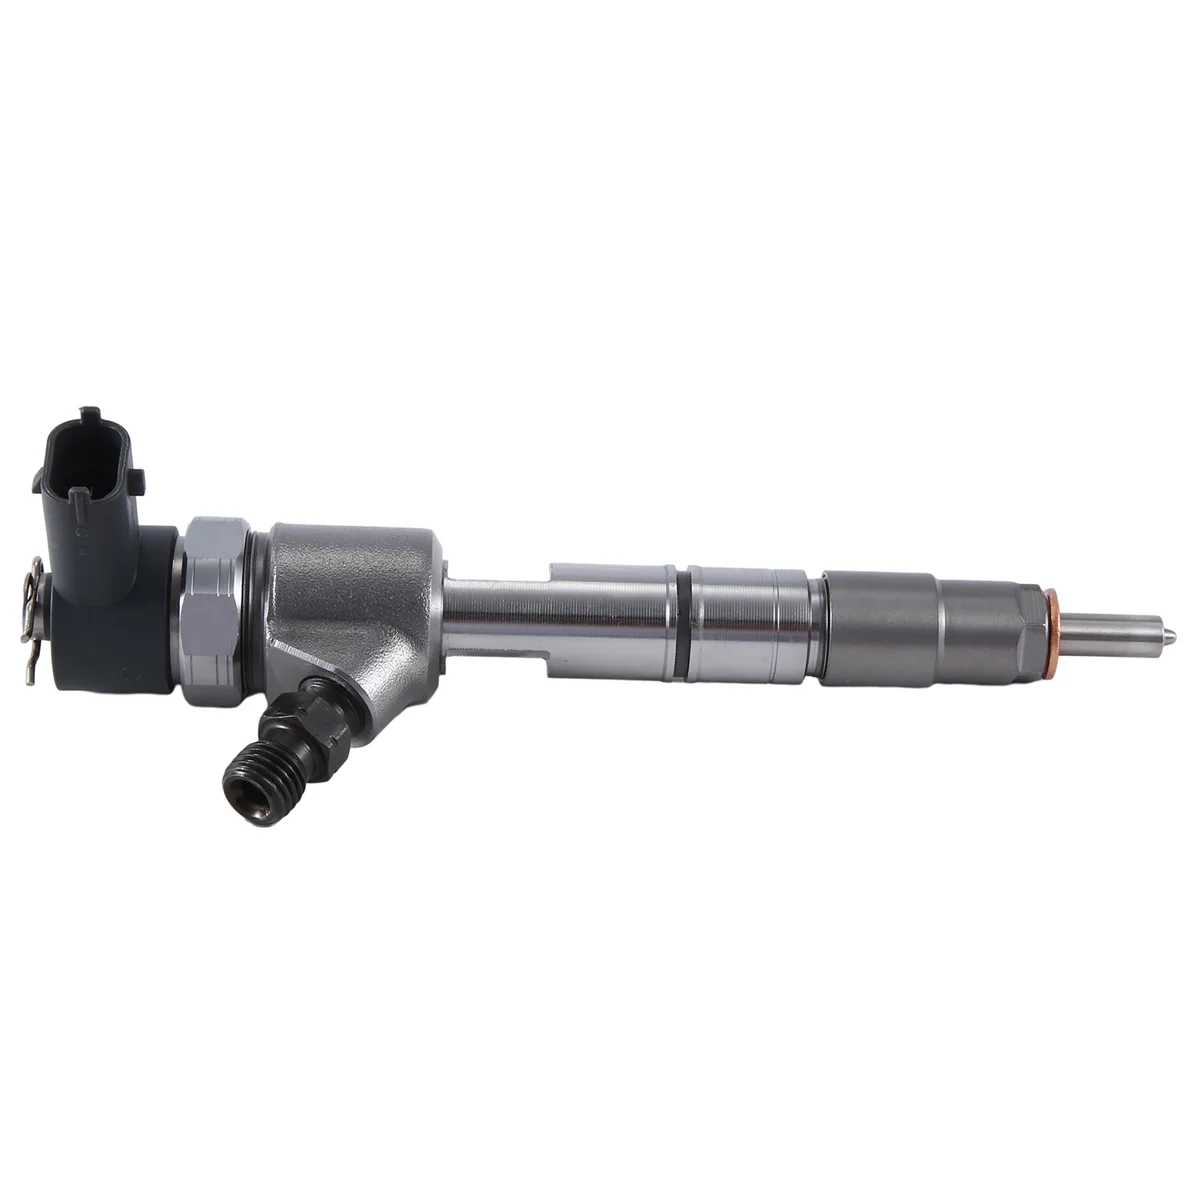 

0445110887 New Common Rail Diesel Fuel Injector Nozzle for JXIE